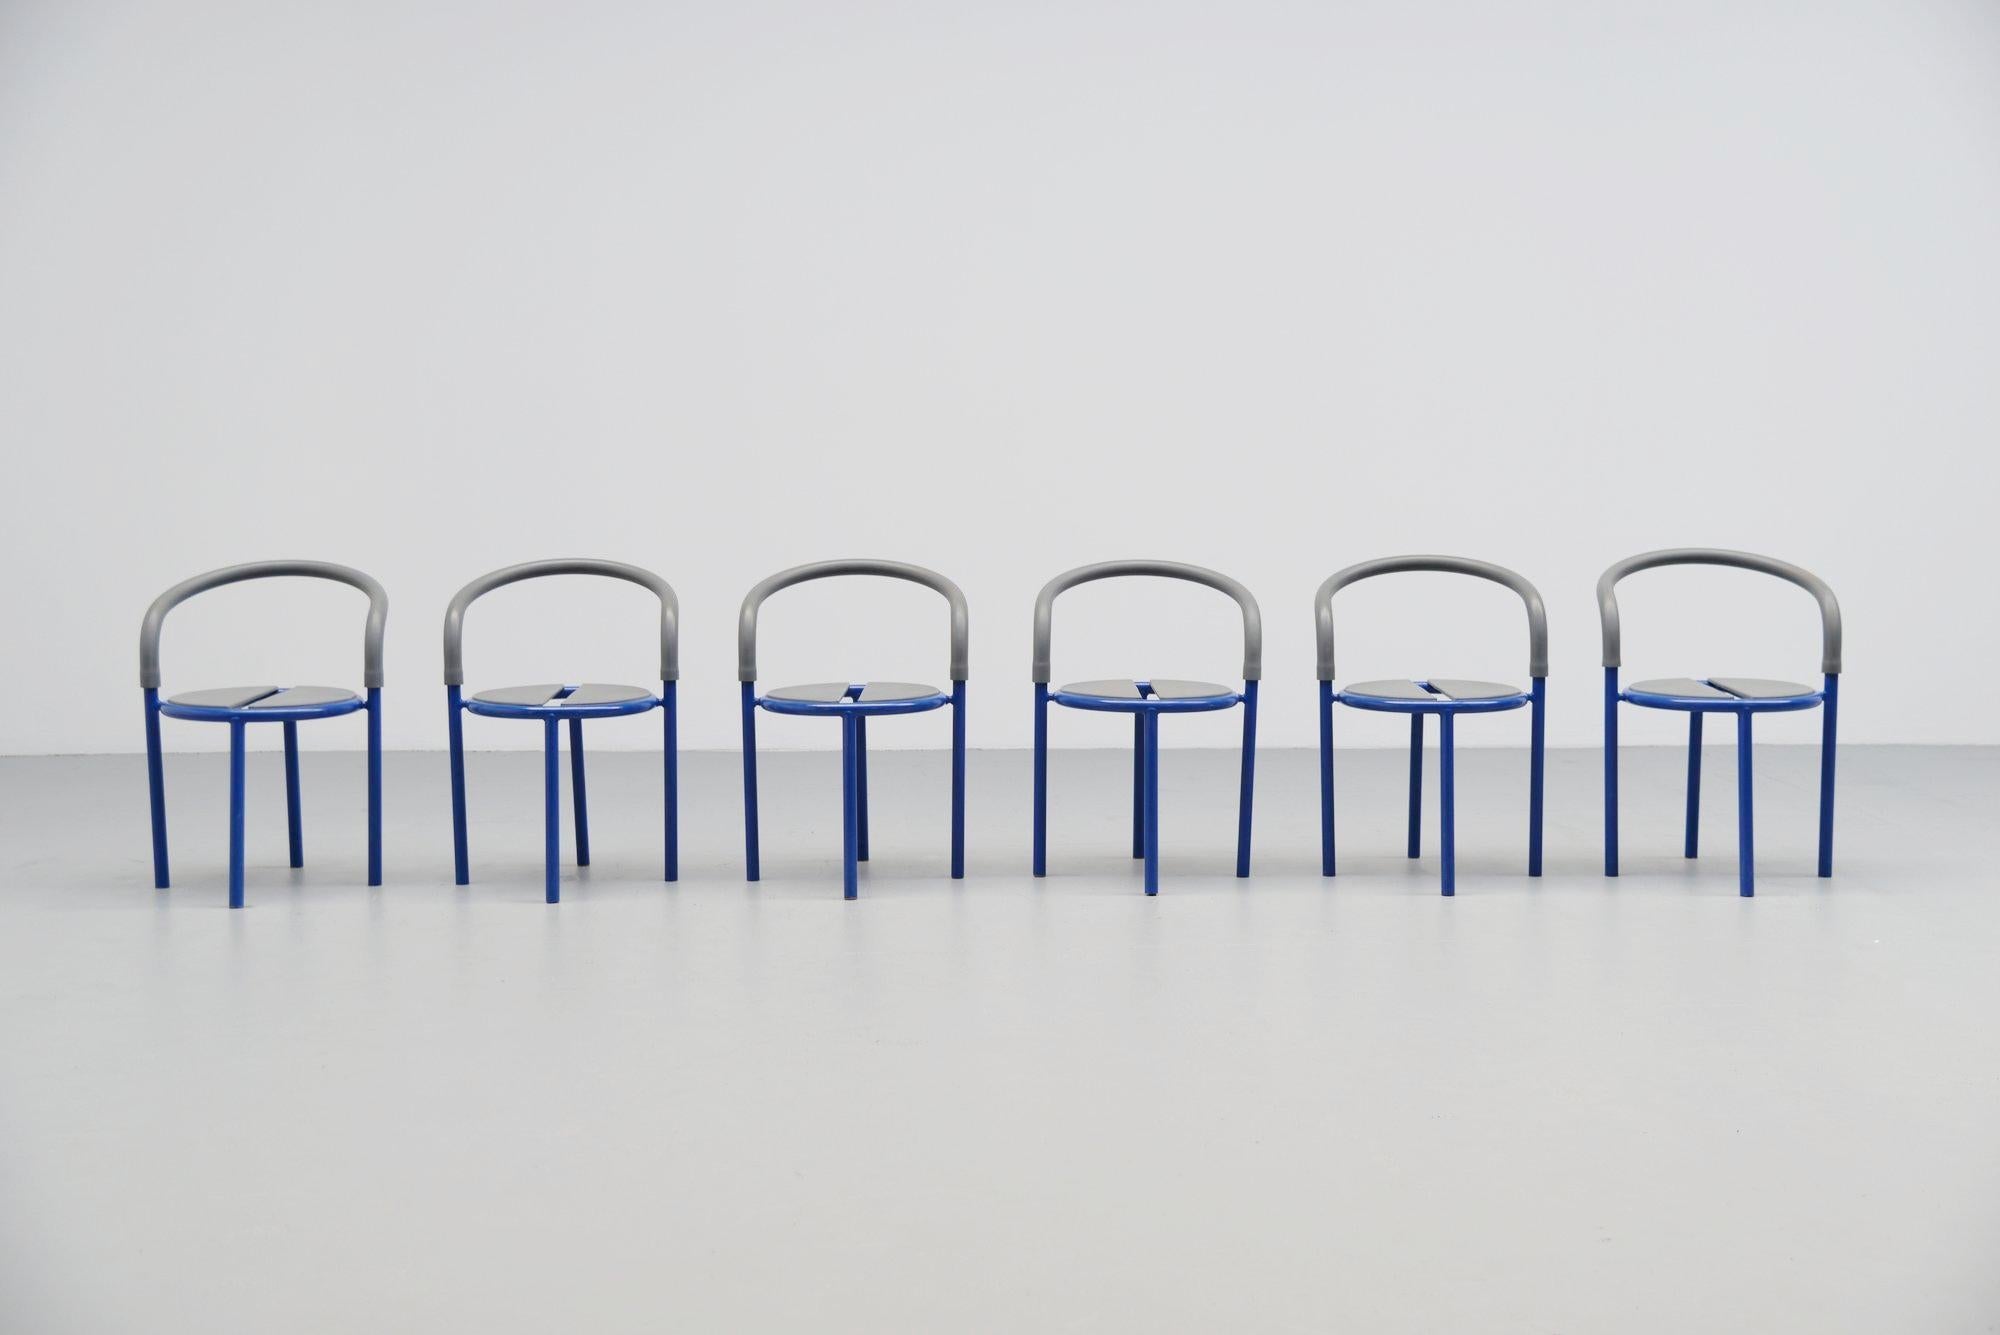 Very nice garden chairs designed by the Niels Gammelgaard for Fritz Hansen produced in 1990. Nice shiny blue lacquered metal and rubber seat and back. Can be used outdoors as well, easy to clean. All in good condition and all marked with the Fritz